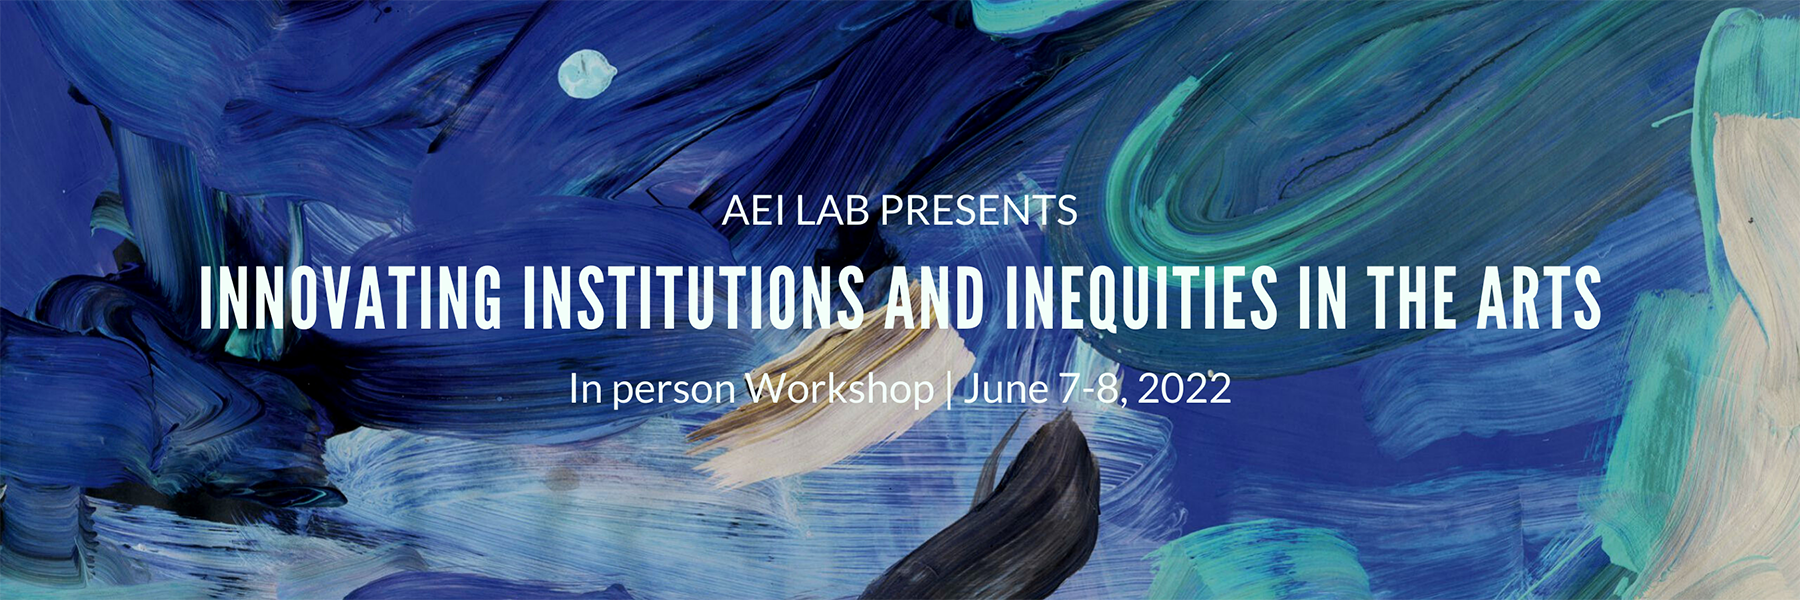 AEI Lab Presents: Innovating Institutions and Inequities in the Arts: In person workshop , June 7-8 2022